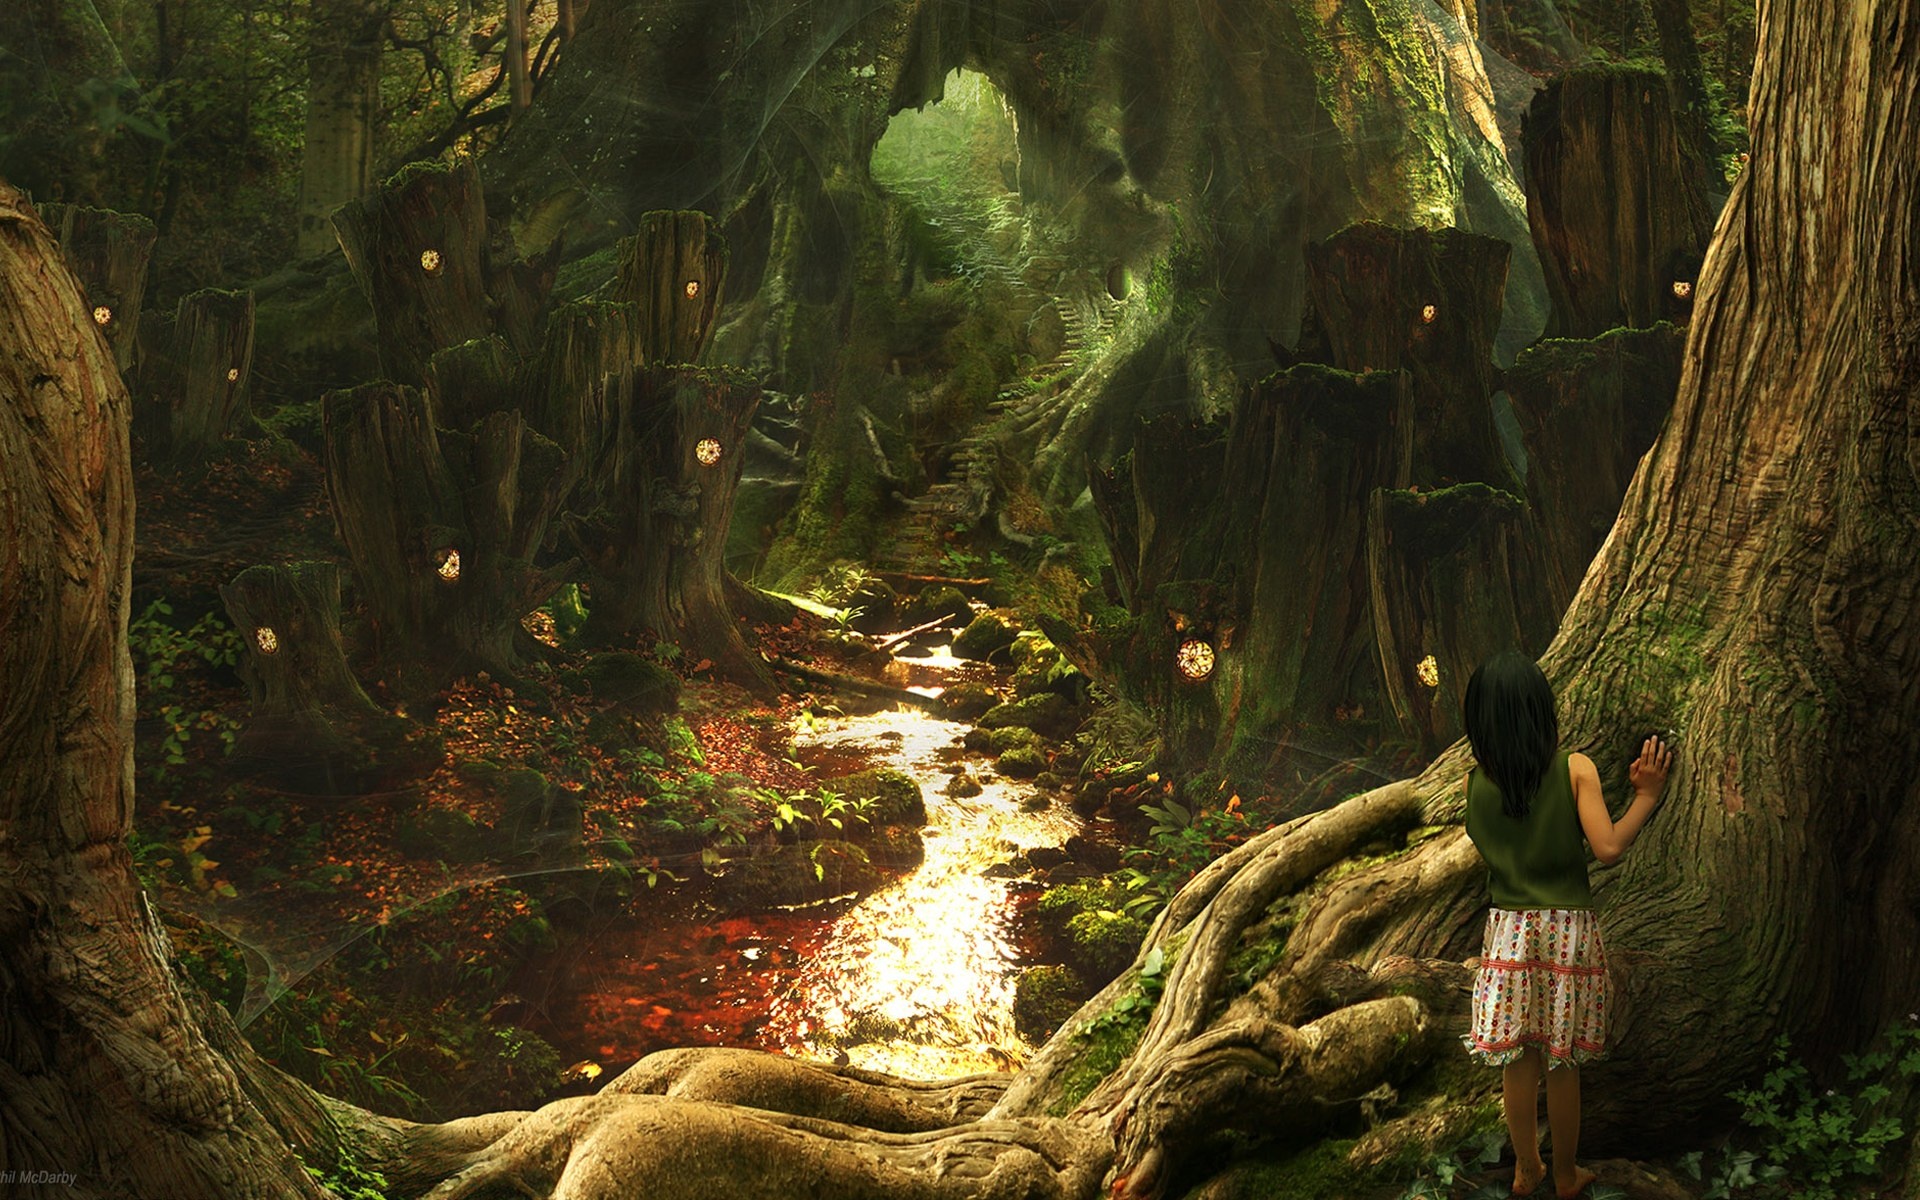 Fairy Tale Forest wallpapers and images   wallpapers pictures photos